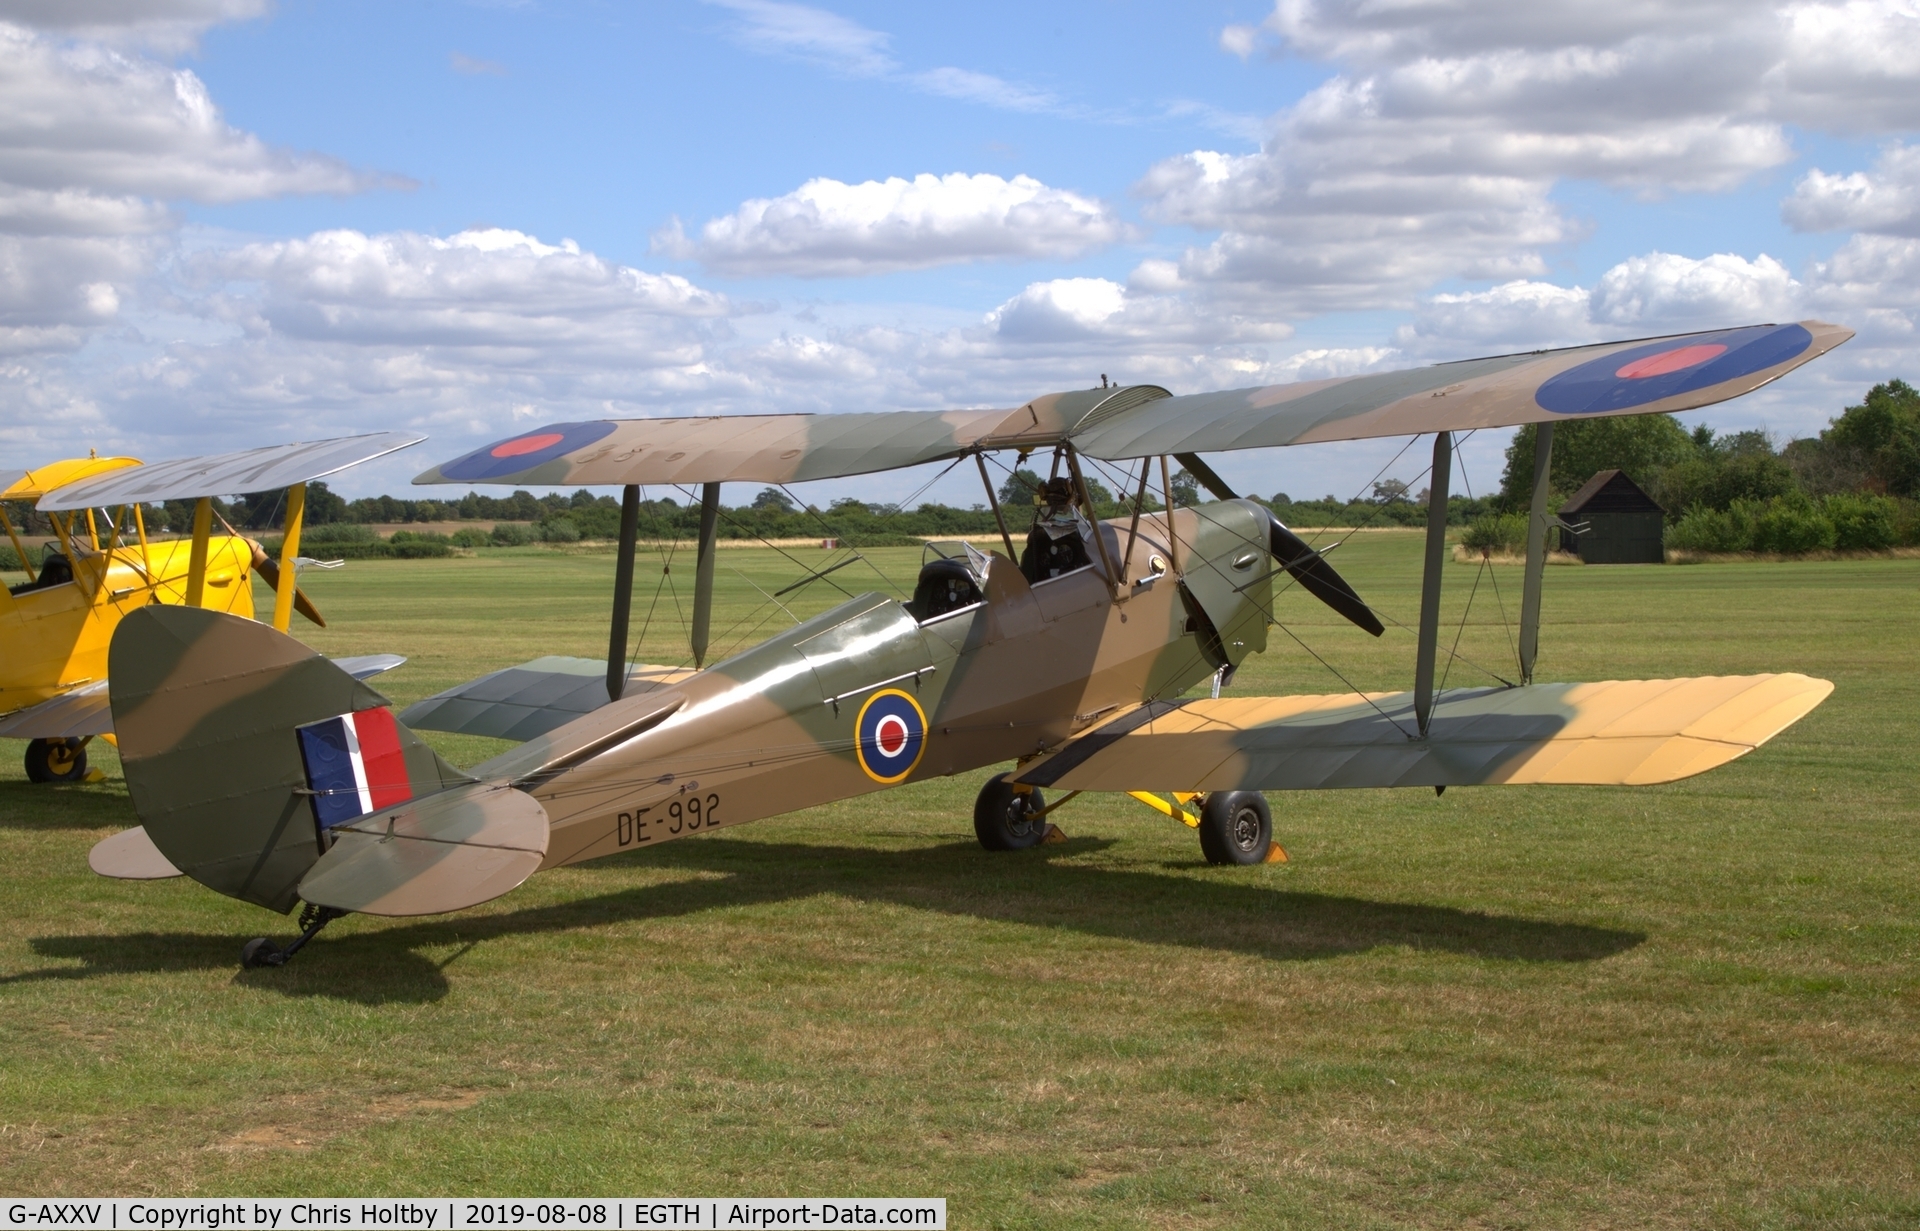 G-AXXV, 1944 De Havilland DH-82A Tiger Moth II C/N 85852, 1944 Tiger Moth on show in RAF livery at the 'Gathering of Moths' 2019 at Old Warden